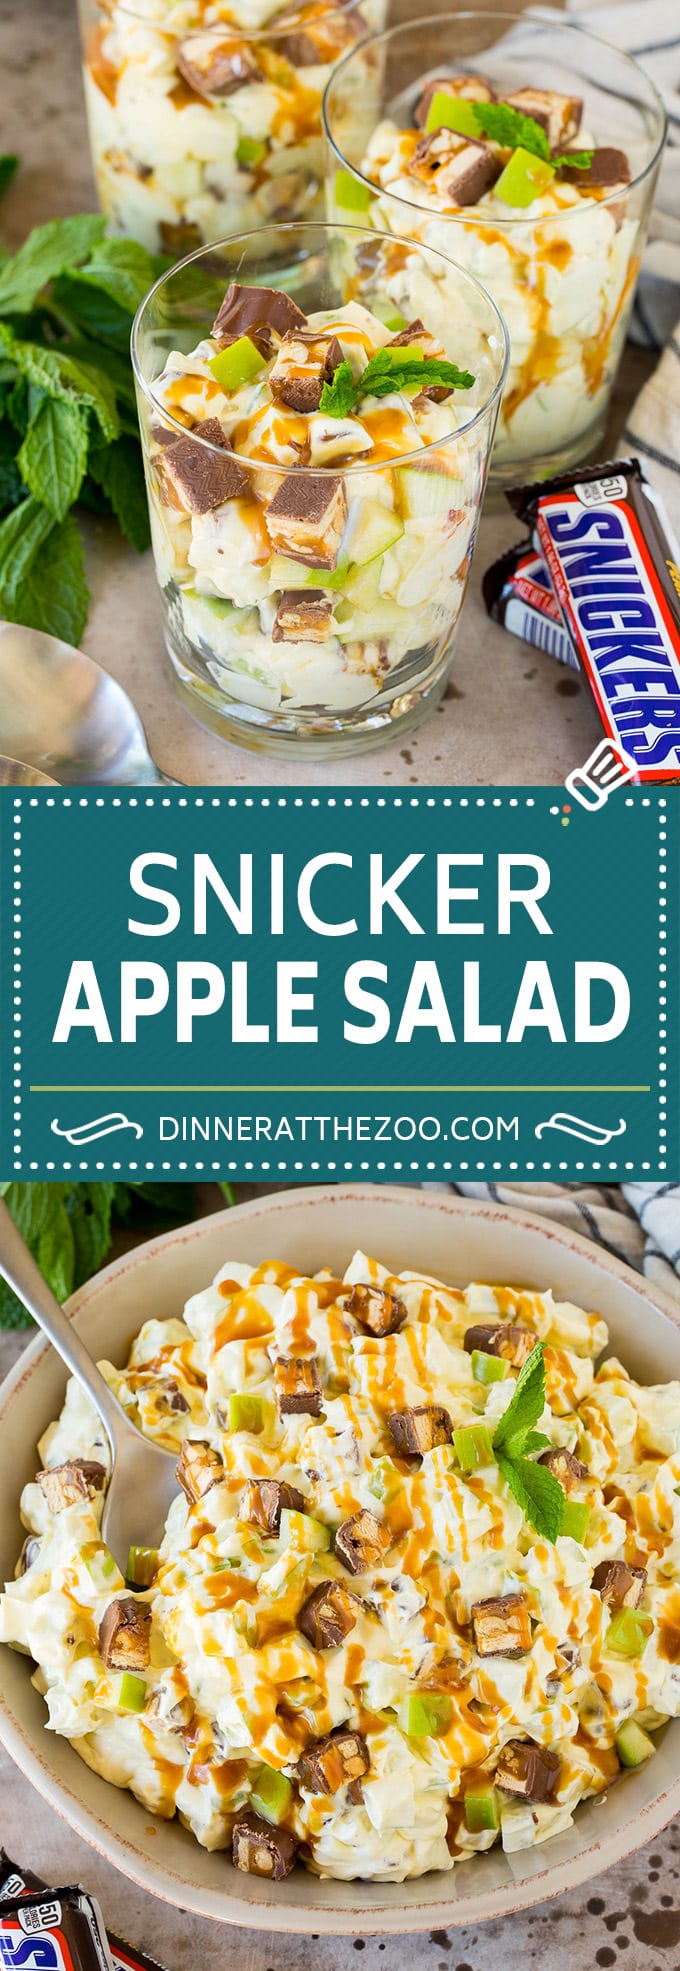 This snicker apple salad is fresh apples and chopped candy bars in a sweet and creamy dressing.